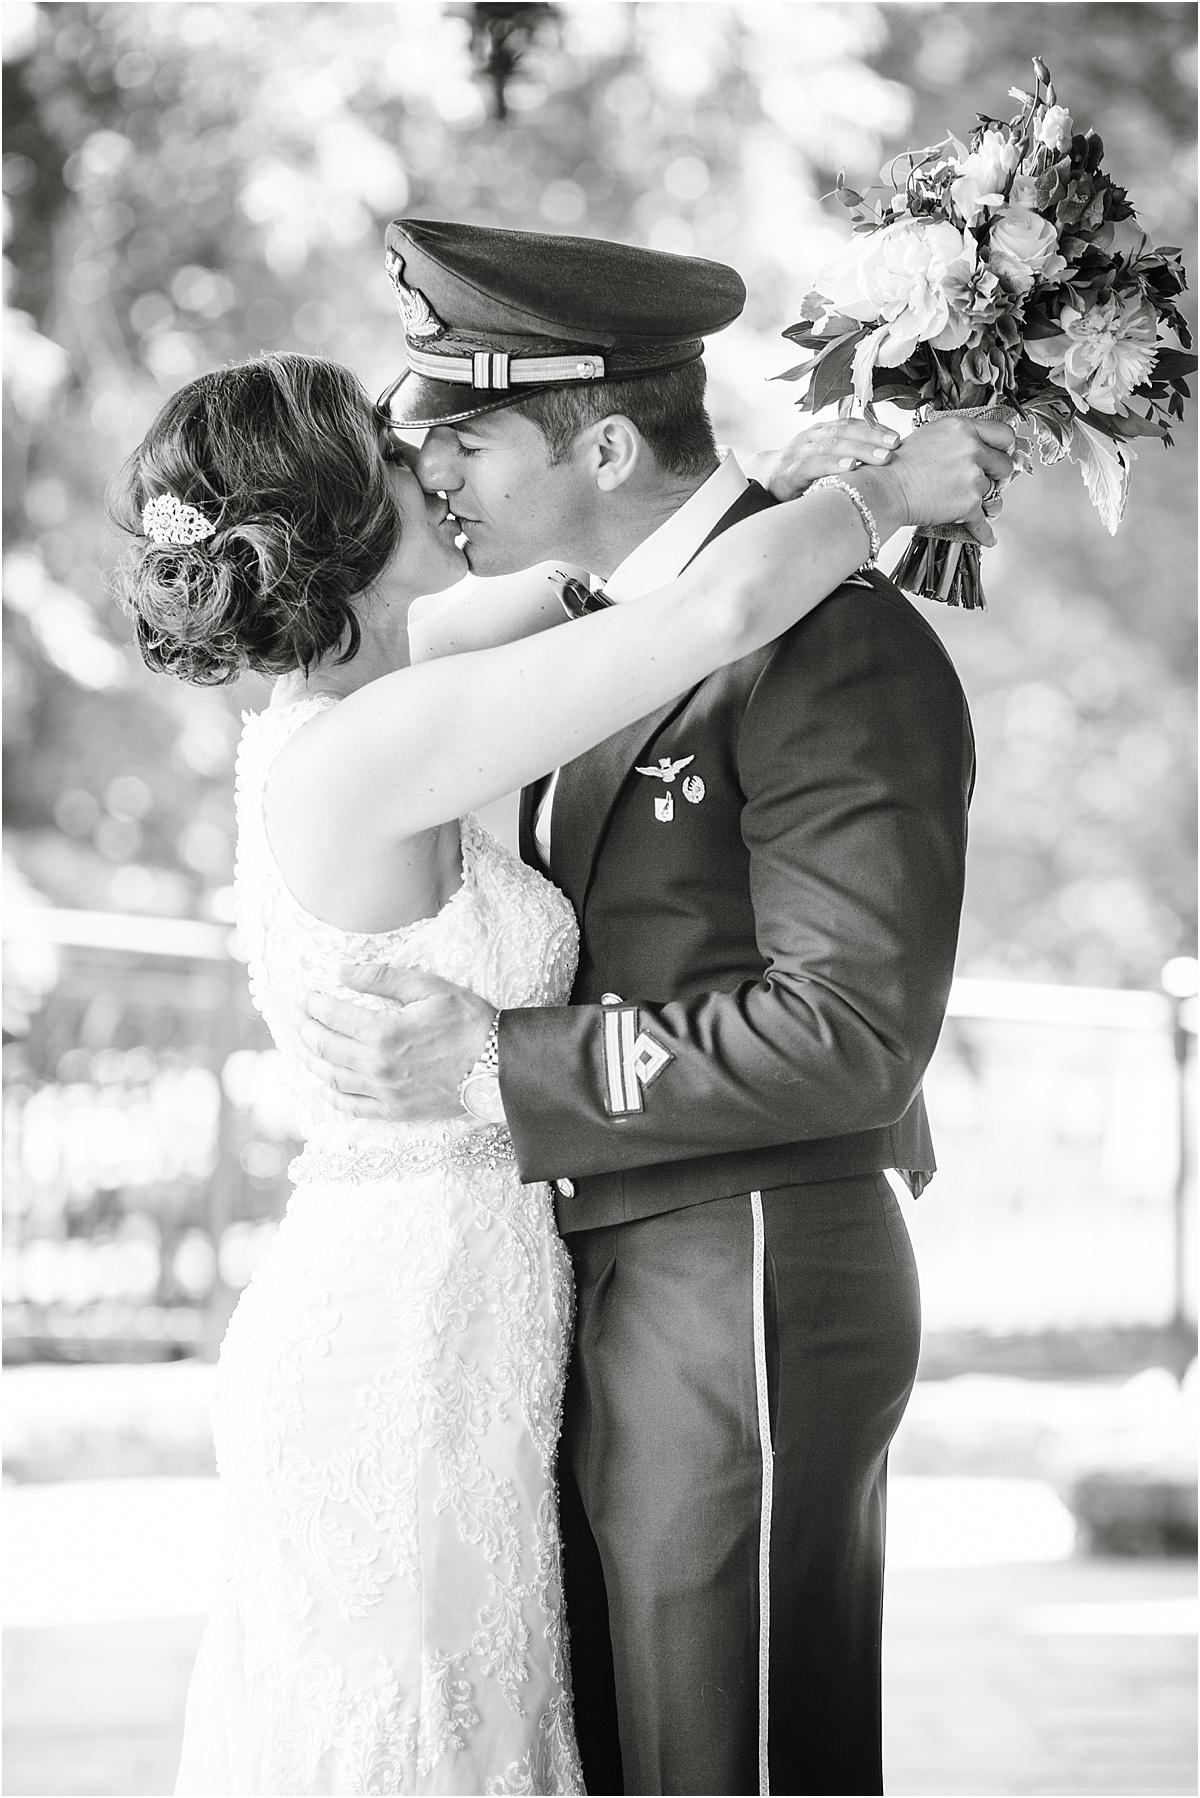 The best-wedding-photography-upstate-NY-Lake-George-Military-wedding-The-Inn-at-Erlowest